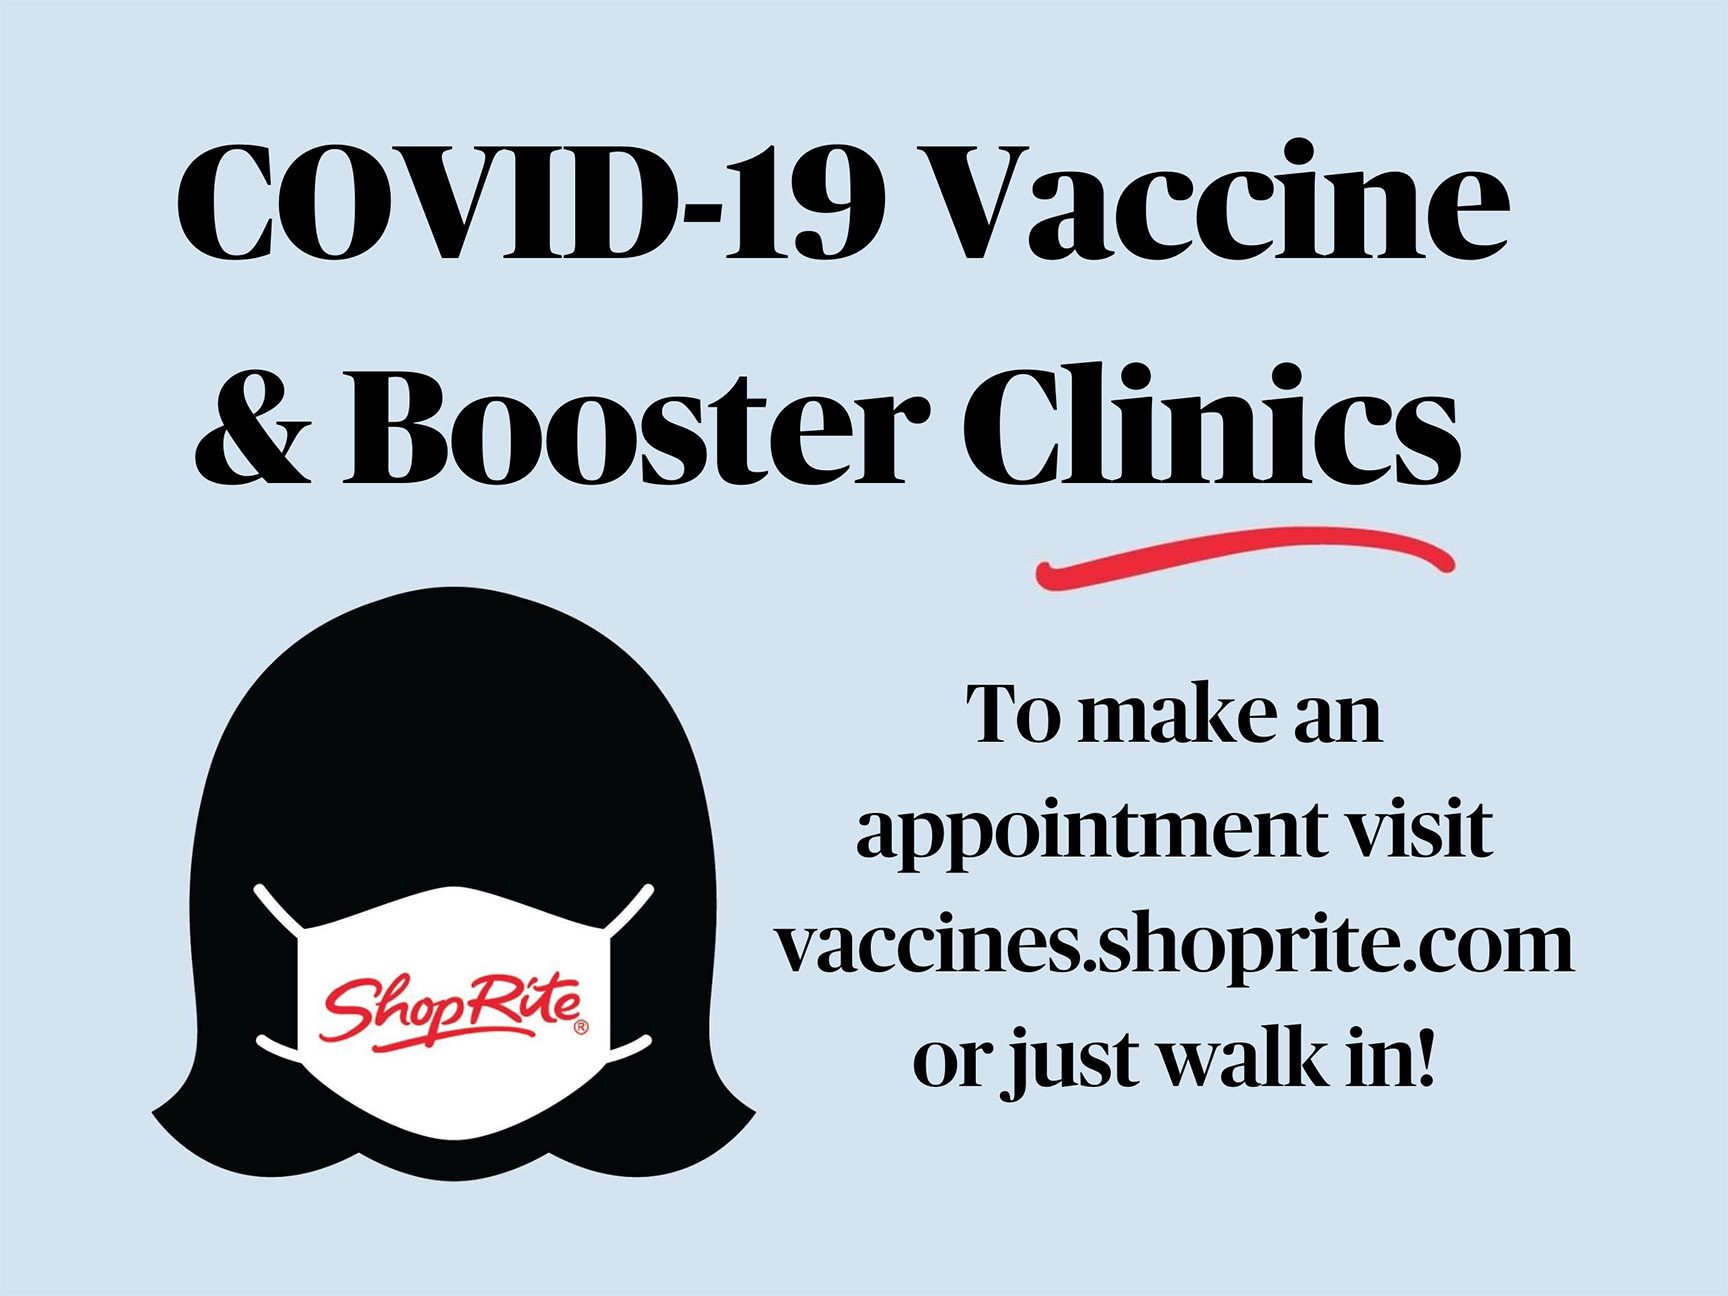 Come get vaccinated – we’re hosting COVID clinics for all!